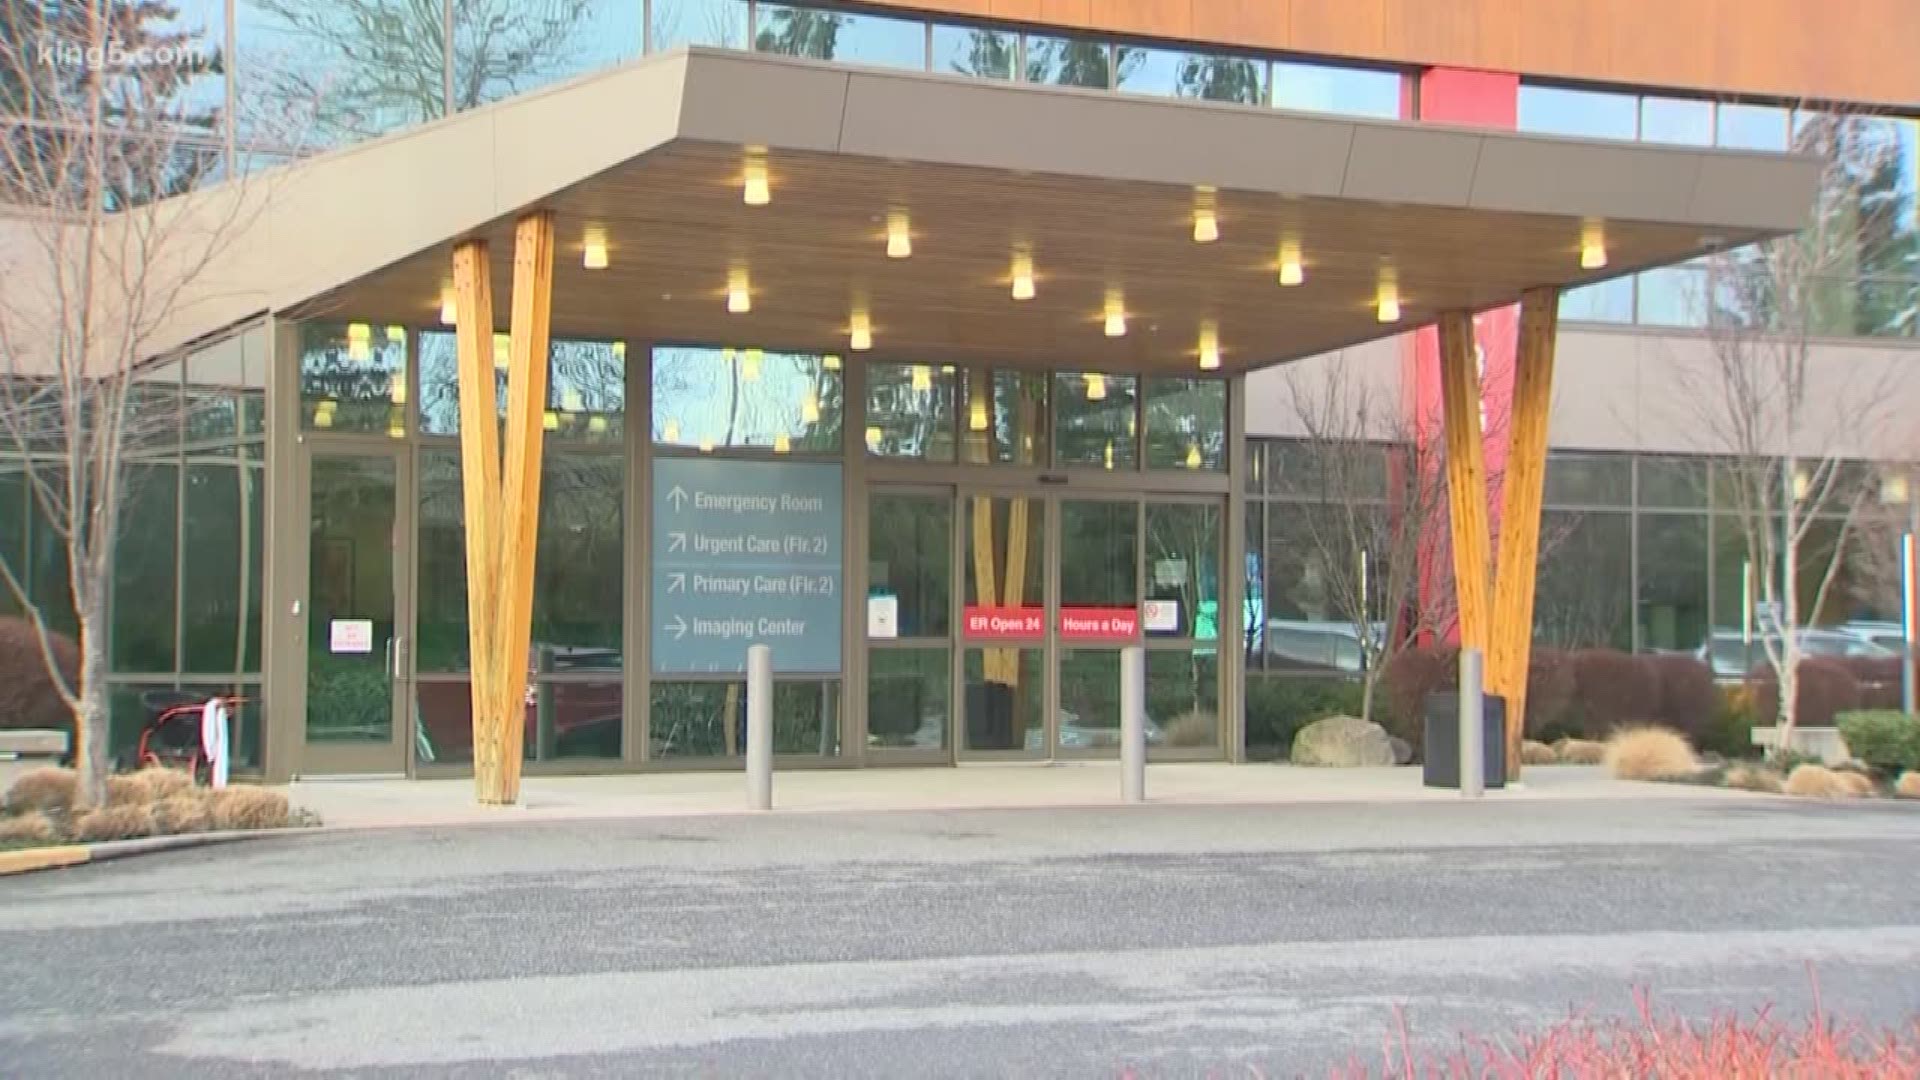 Officials with Swedish medical centers say they are closing emergency rooms in Redmond and Ballard because they don't have enough replacement workers.